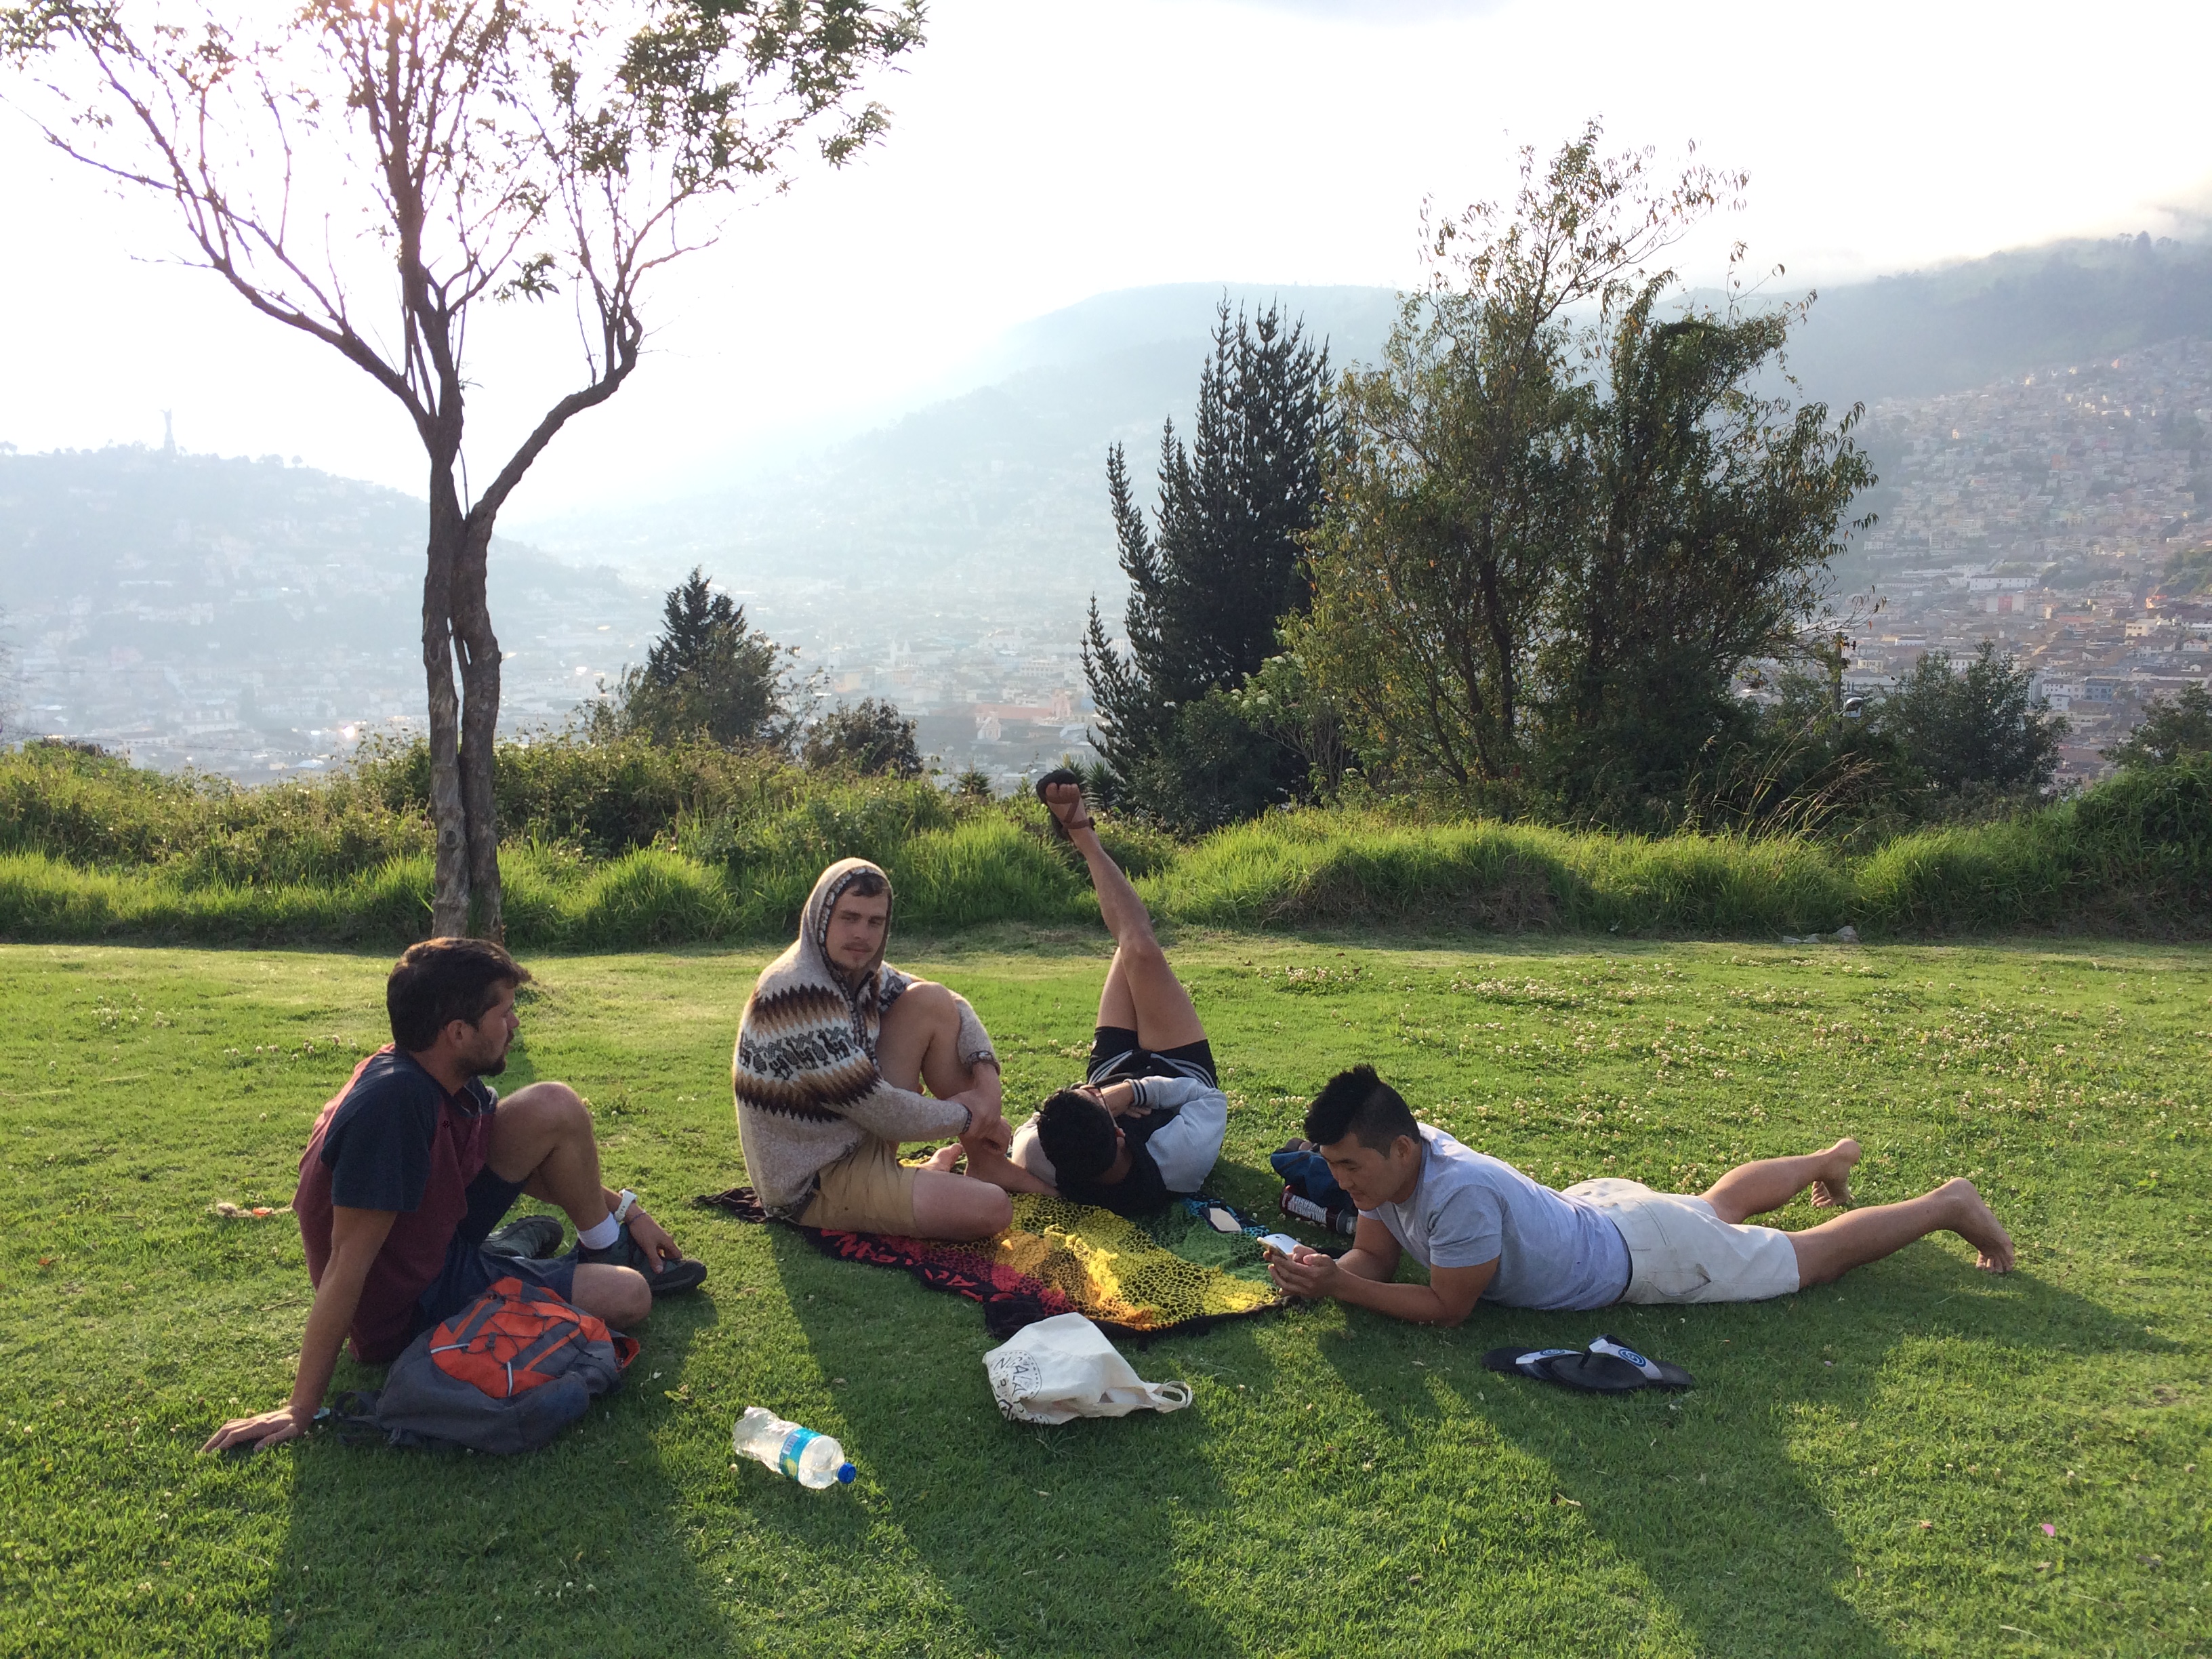 Group of people in the Metropolitan Park of Quito.